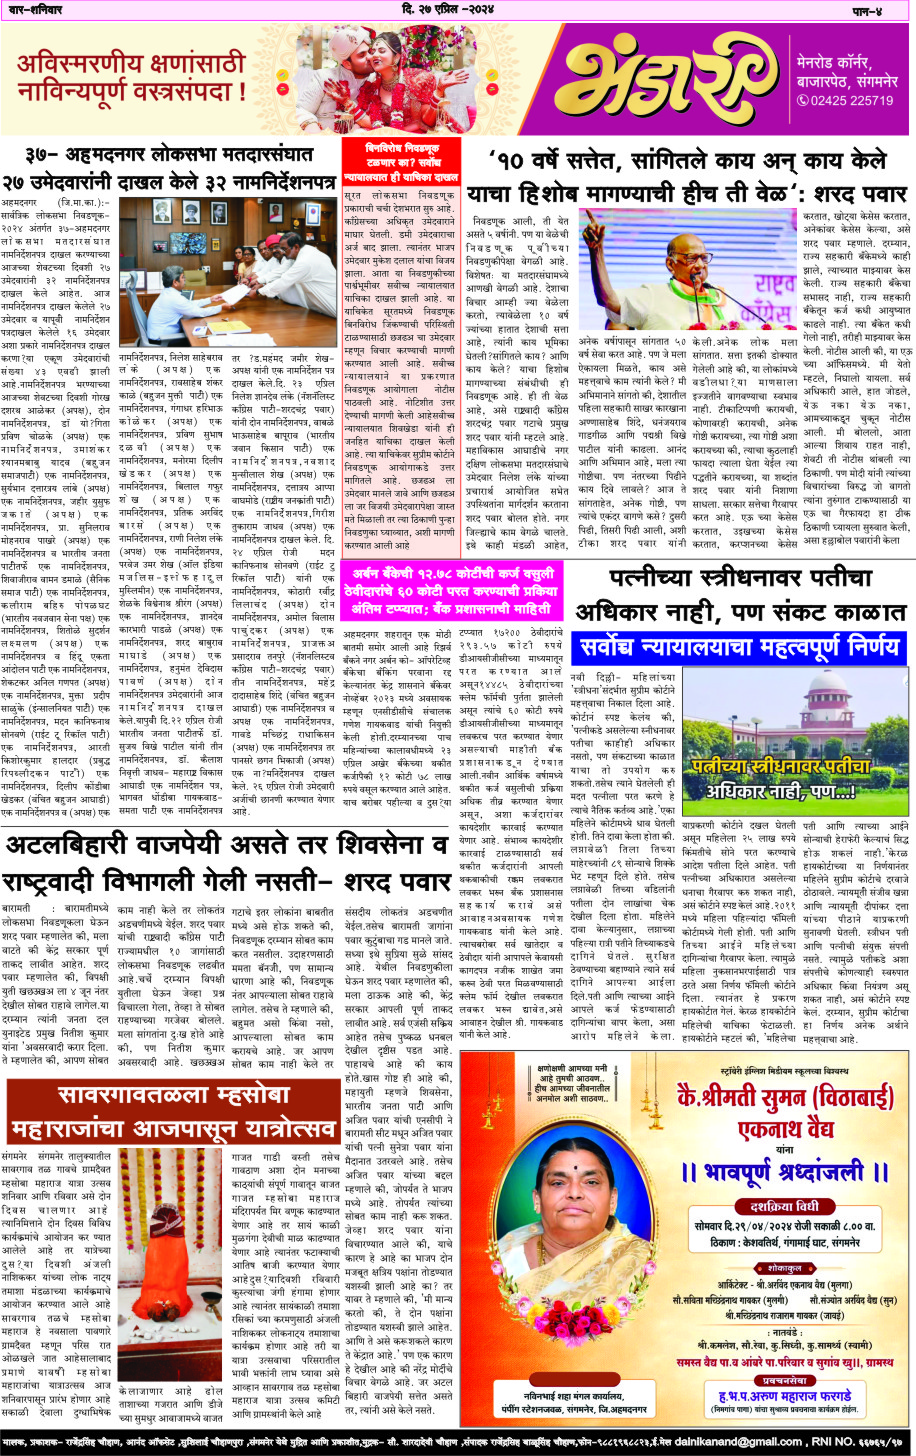 Front page of daily newspaper ANAND